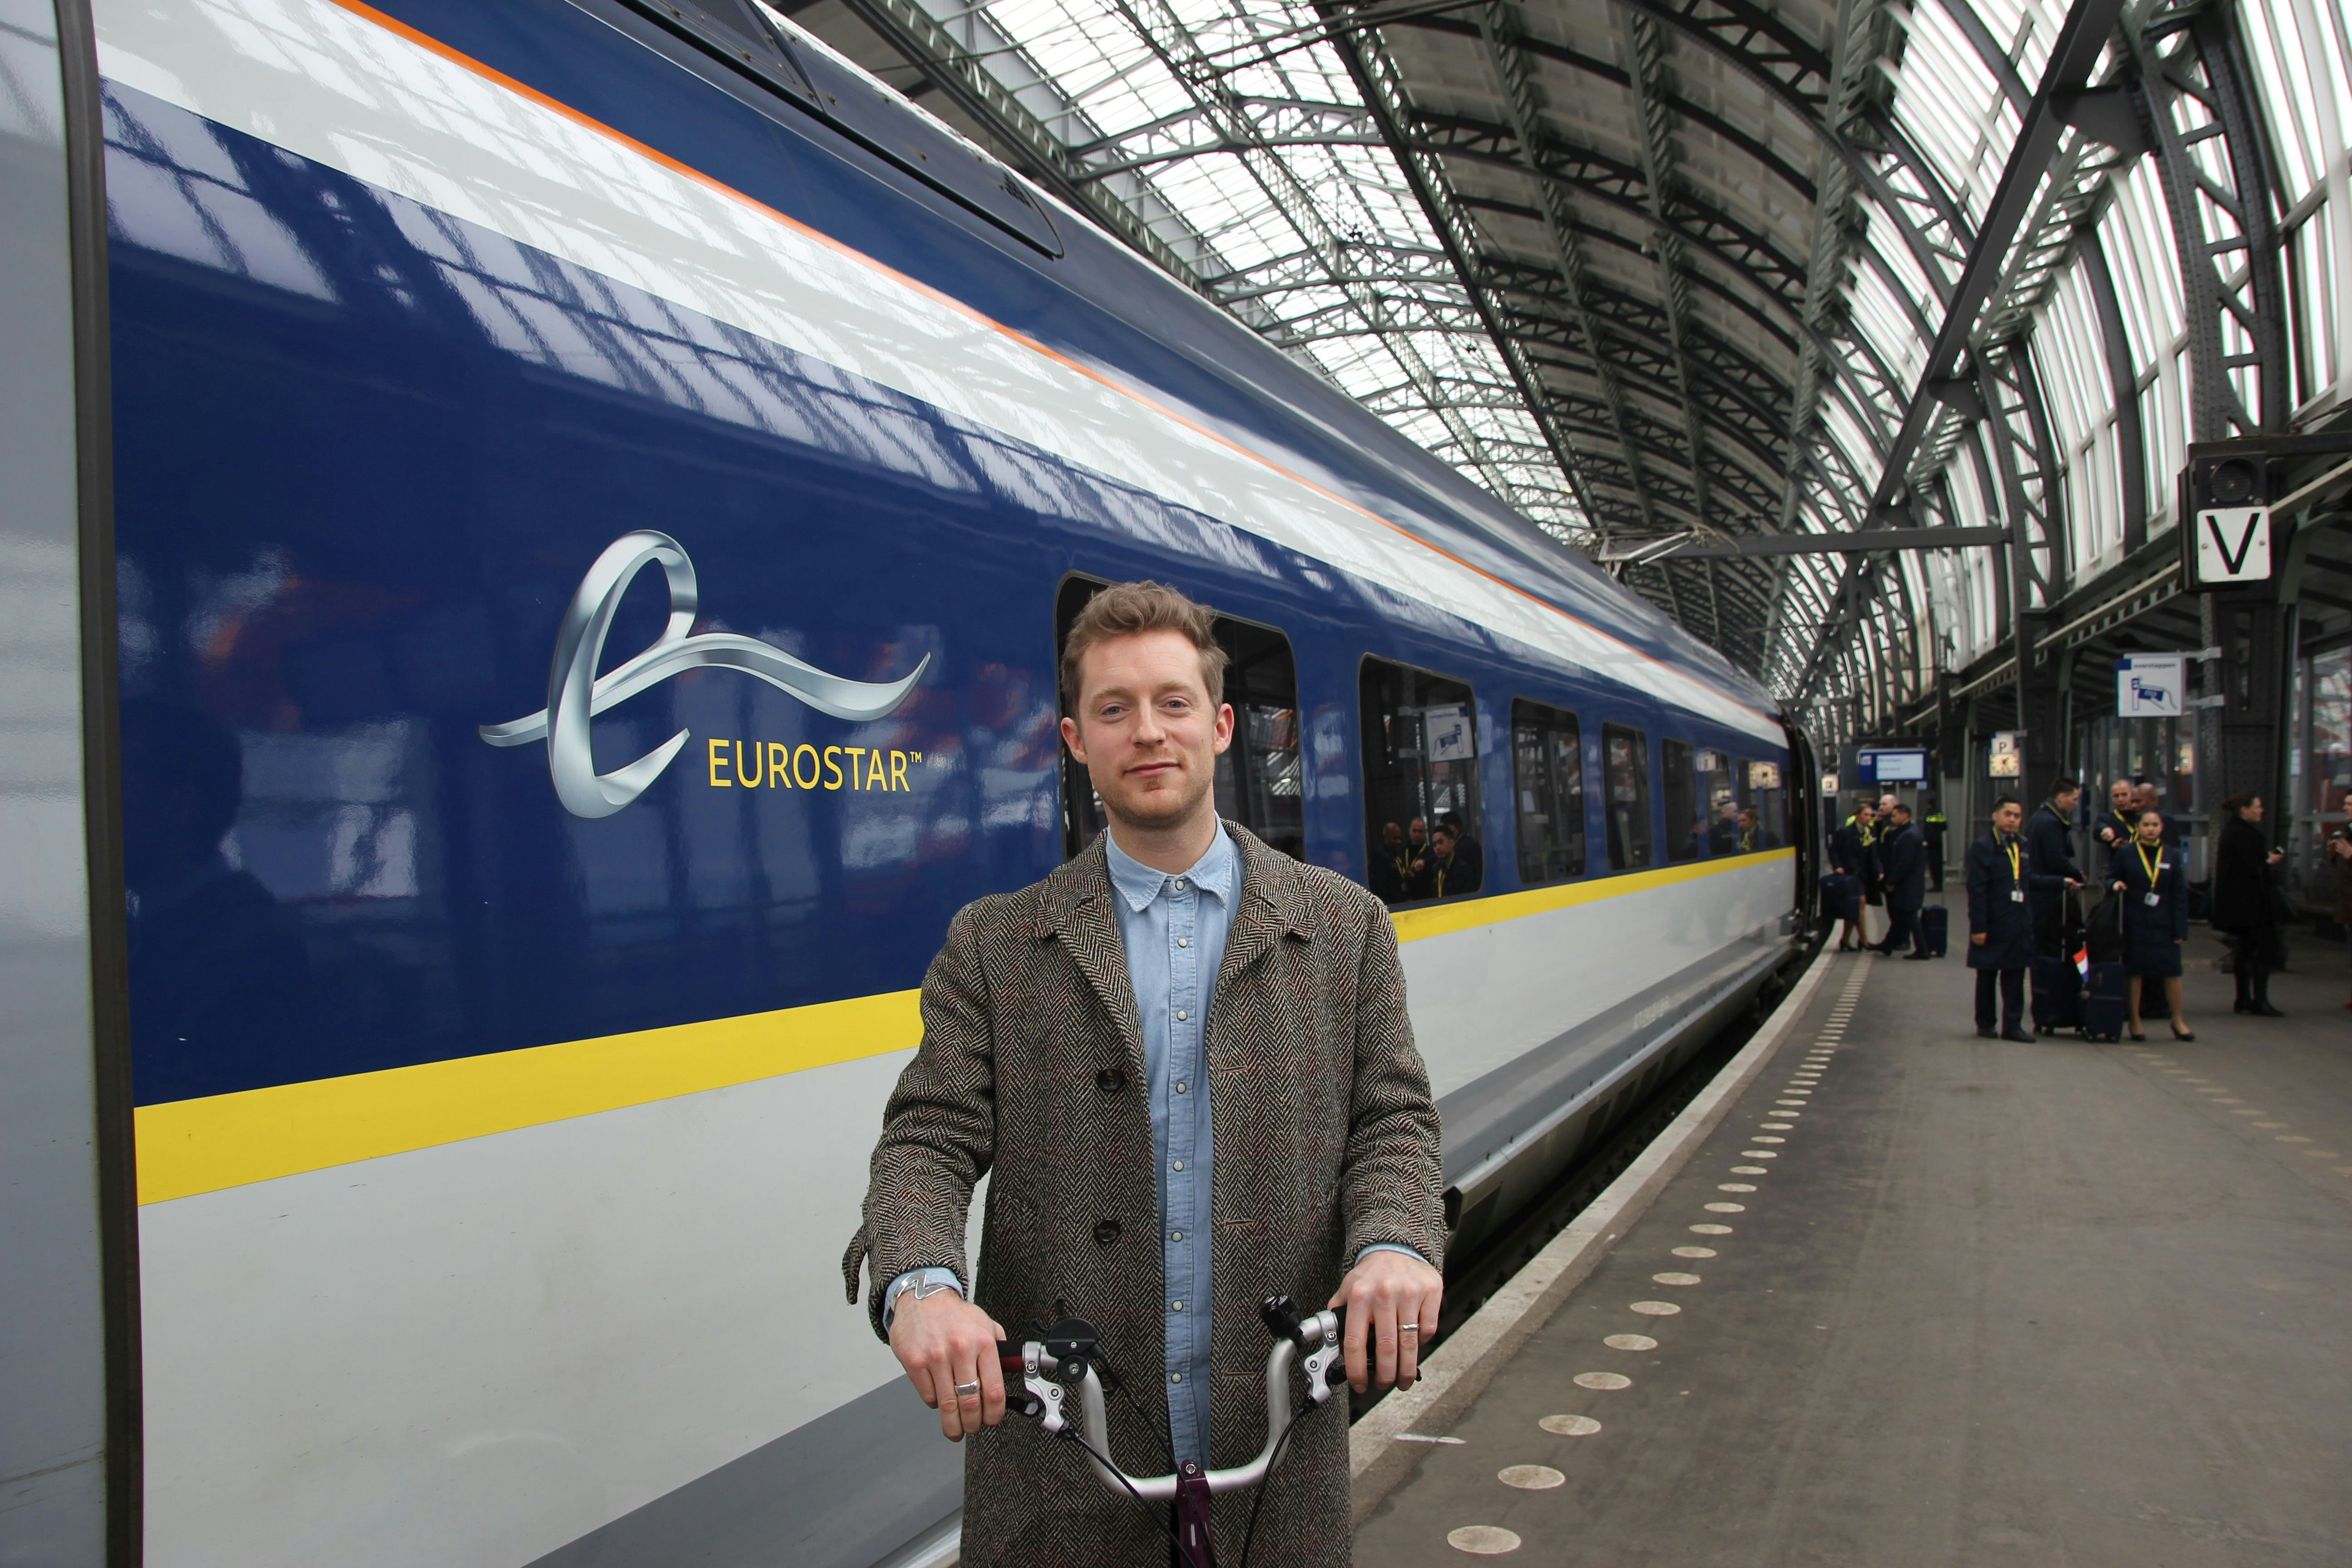 A white man wearing a brown jacket and blue shirt stands with his bike in front of a train